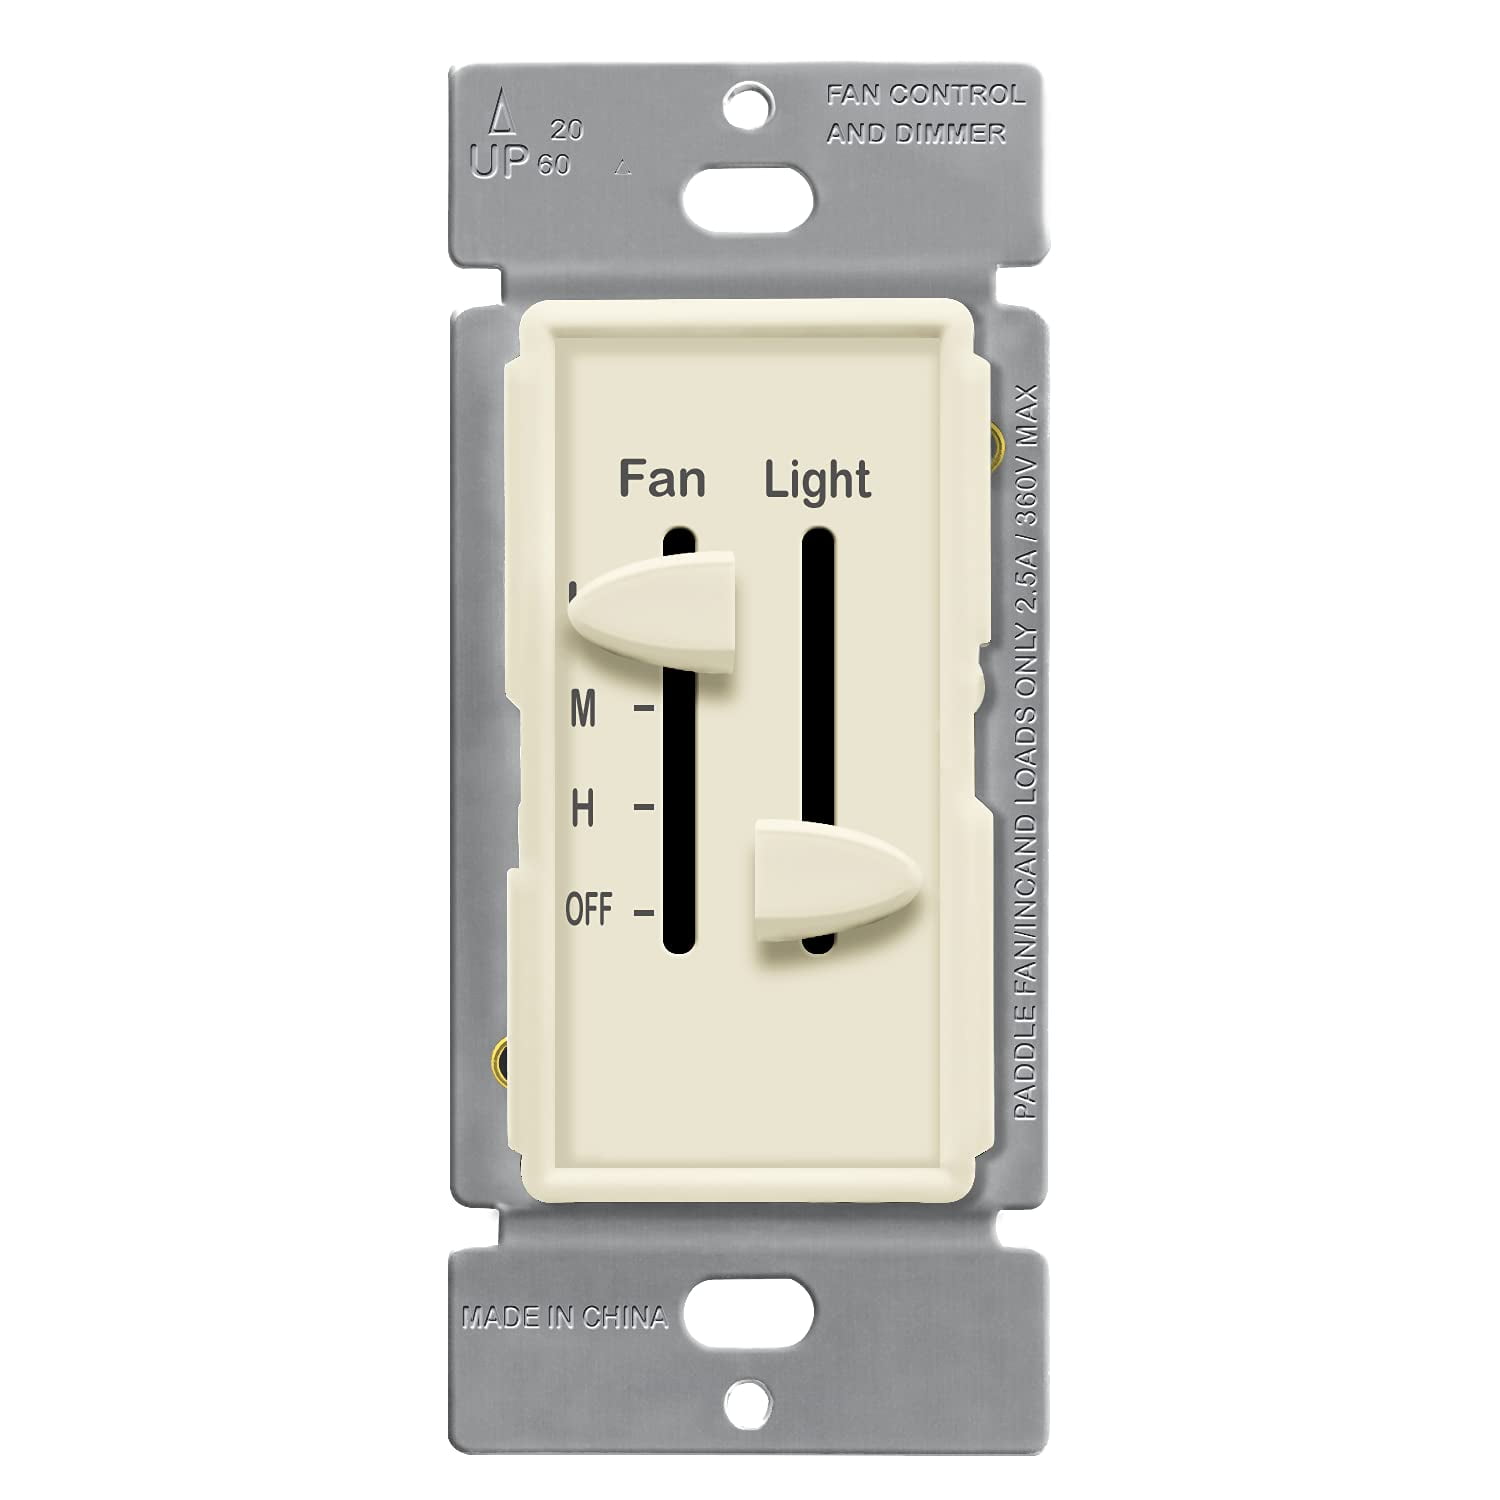 ENERLITES Ceiling Fan Control and LED Dimmer Light Switch, 2.5A Pole. 300W Incandescent Load, No Neutral Wire Required, 17001-F3-W, White - Walmart.com